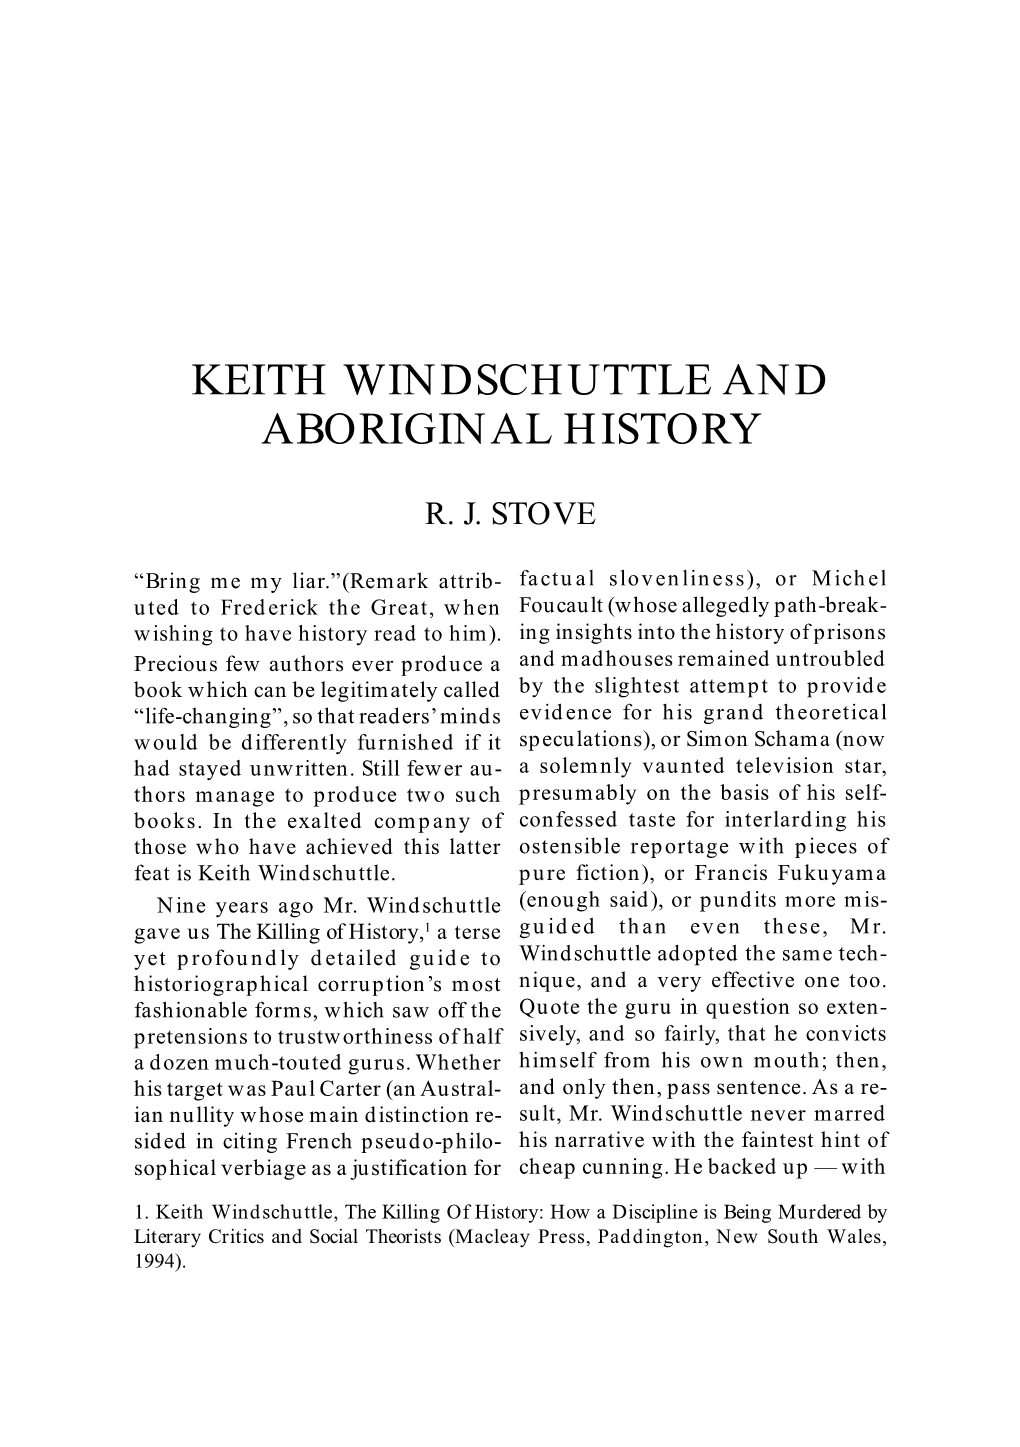 Keith Windschuttle and Aboriginal History